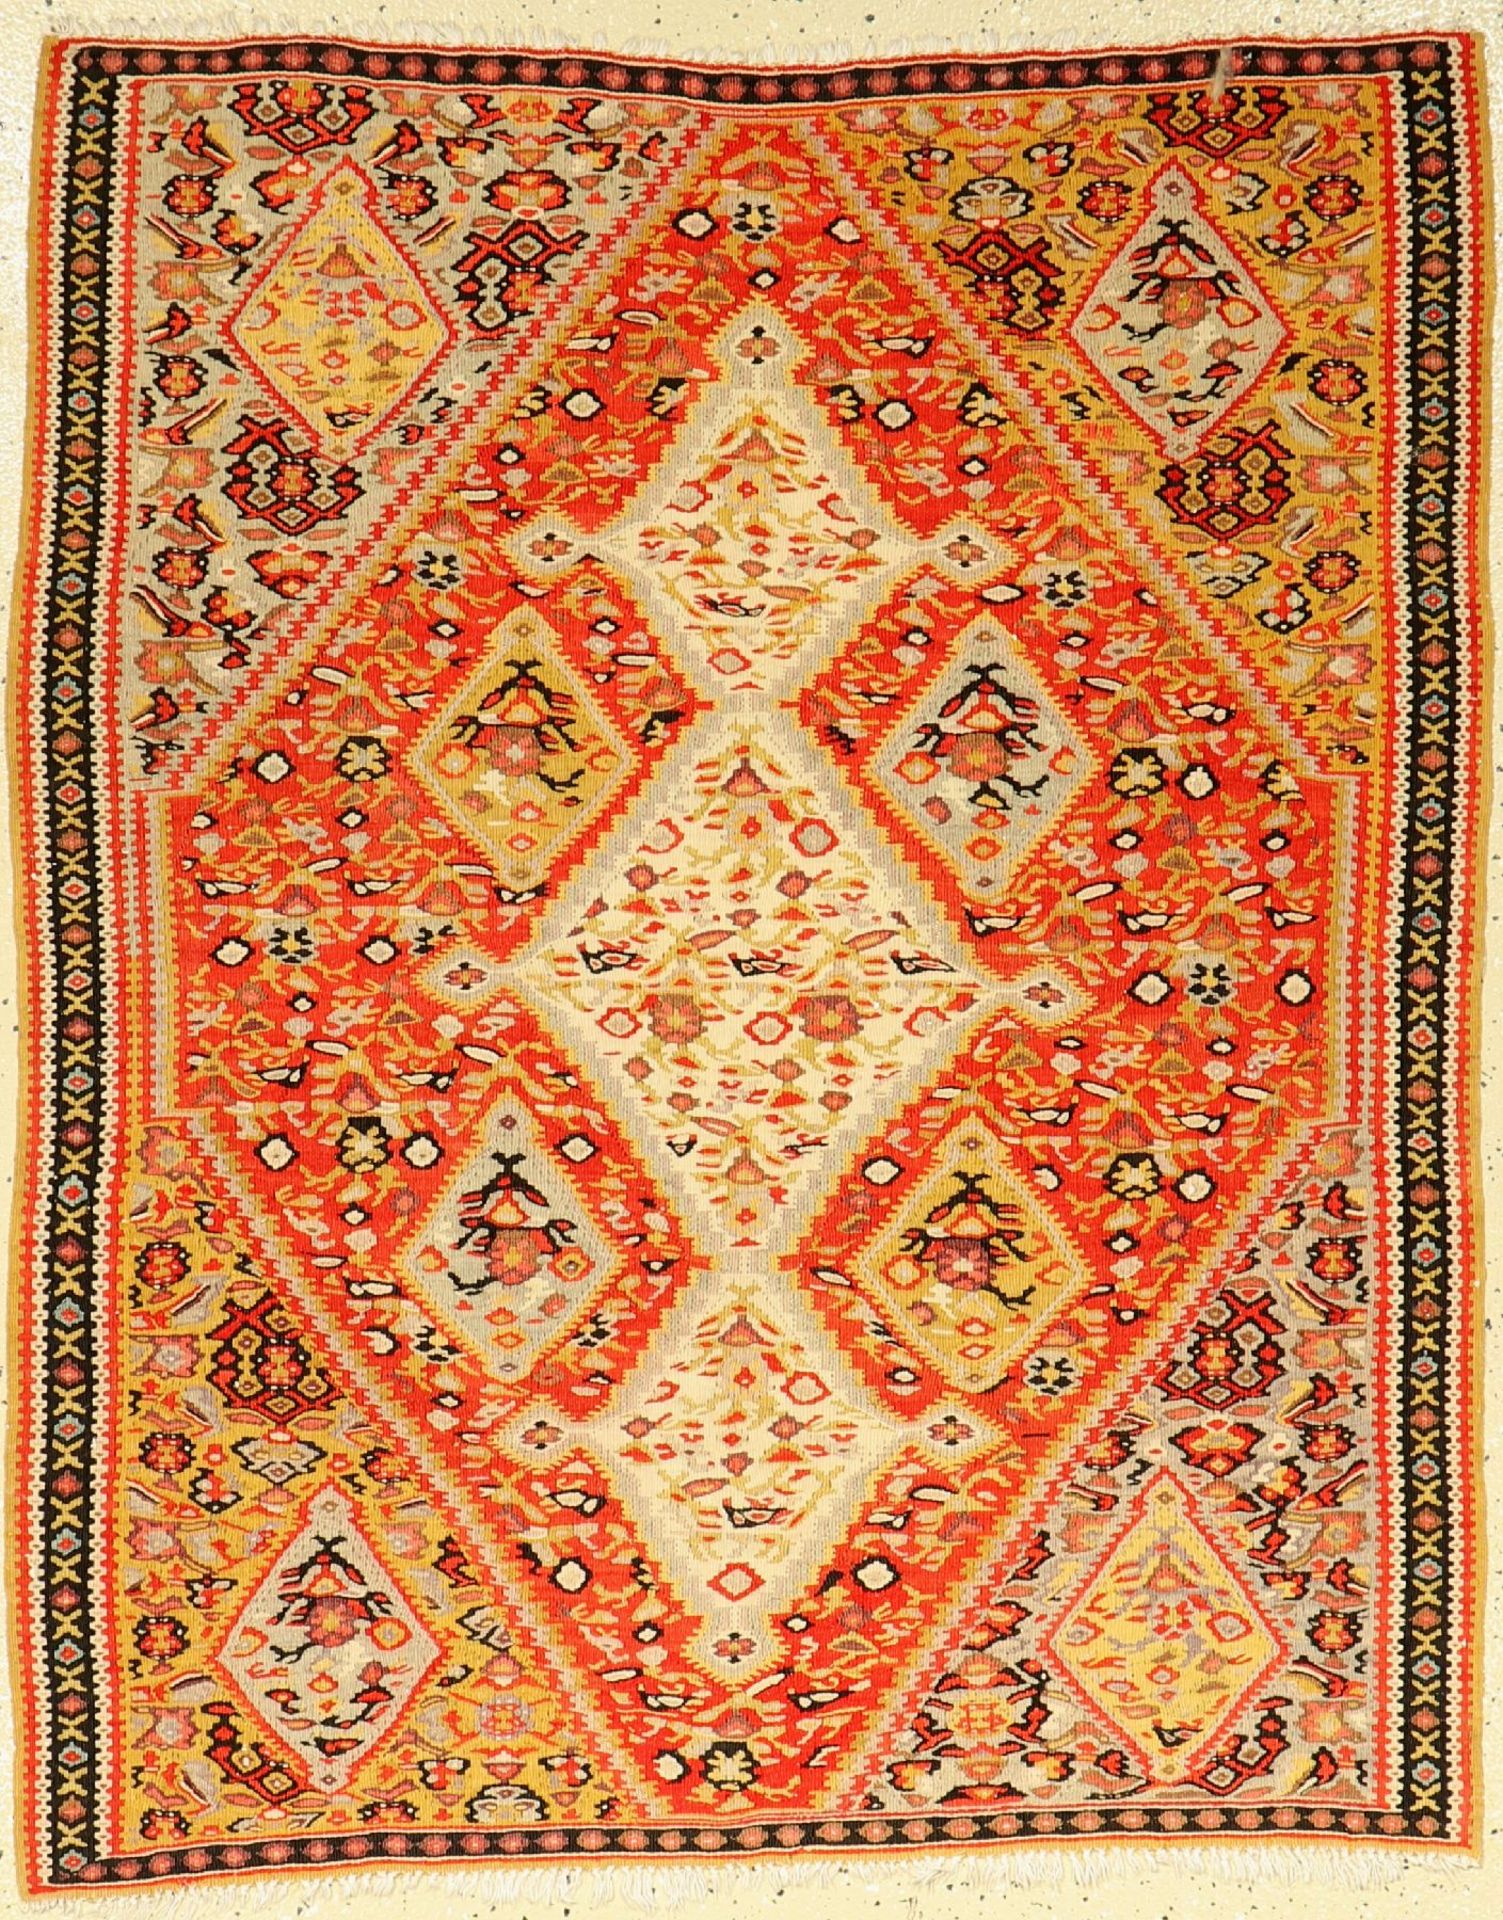 Senneh Kilim old, Persia, around 1920, wool oncotton, approx. 122 x 100 cm, rare format,